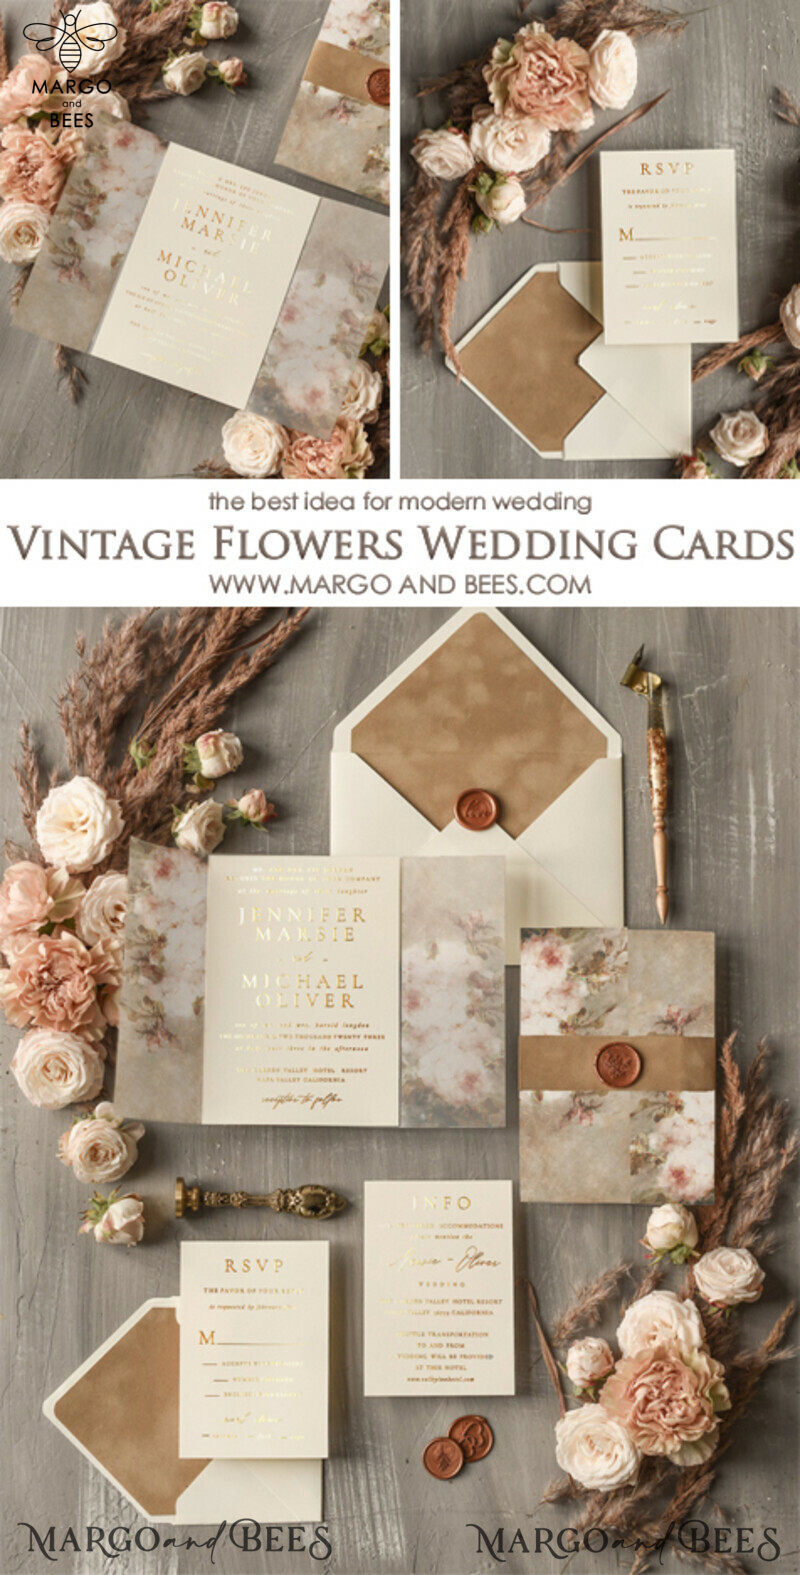 Elegant Gold Beige Nude Wedding Invitations: A Luxury Golden Wedding Invitation Suite with a Boho Chic Touch. Featuring Gold Wedding Cards, Wax Seal, and a Luxurious Set-3